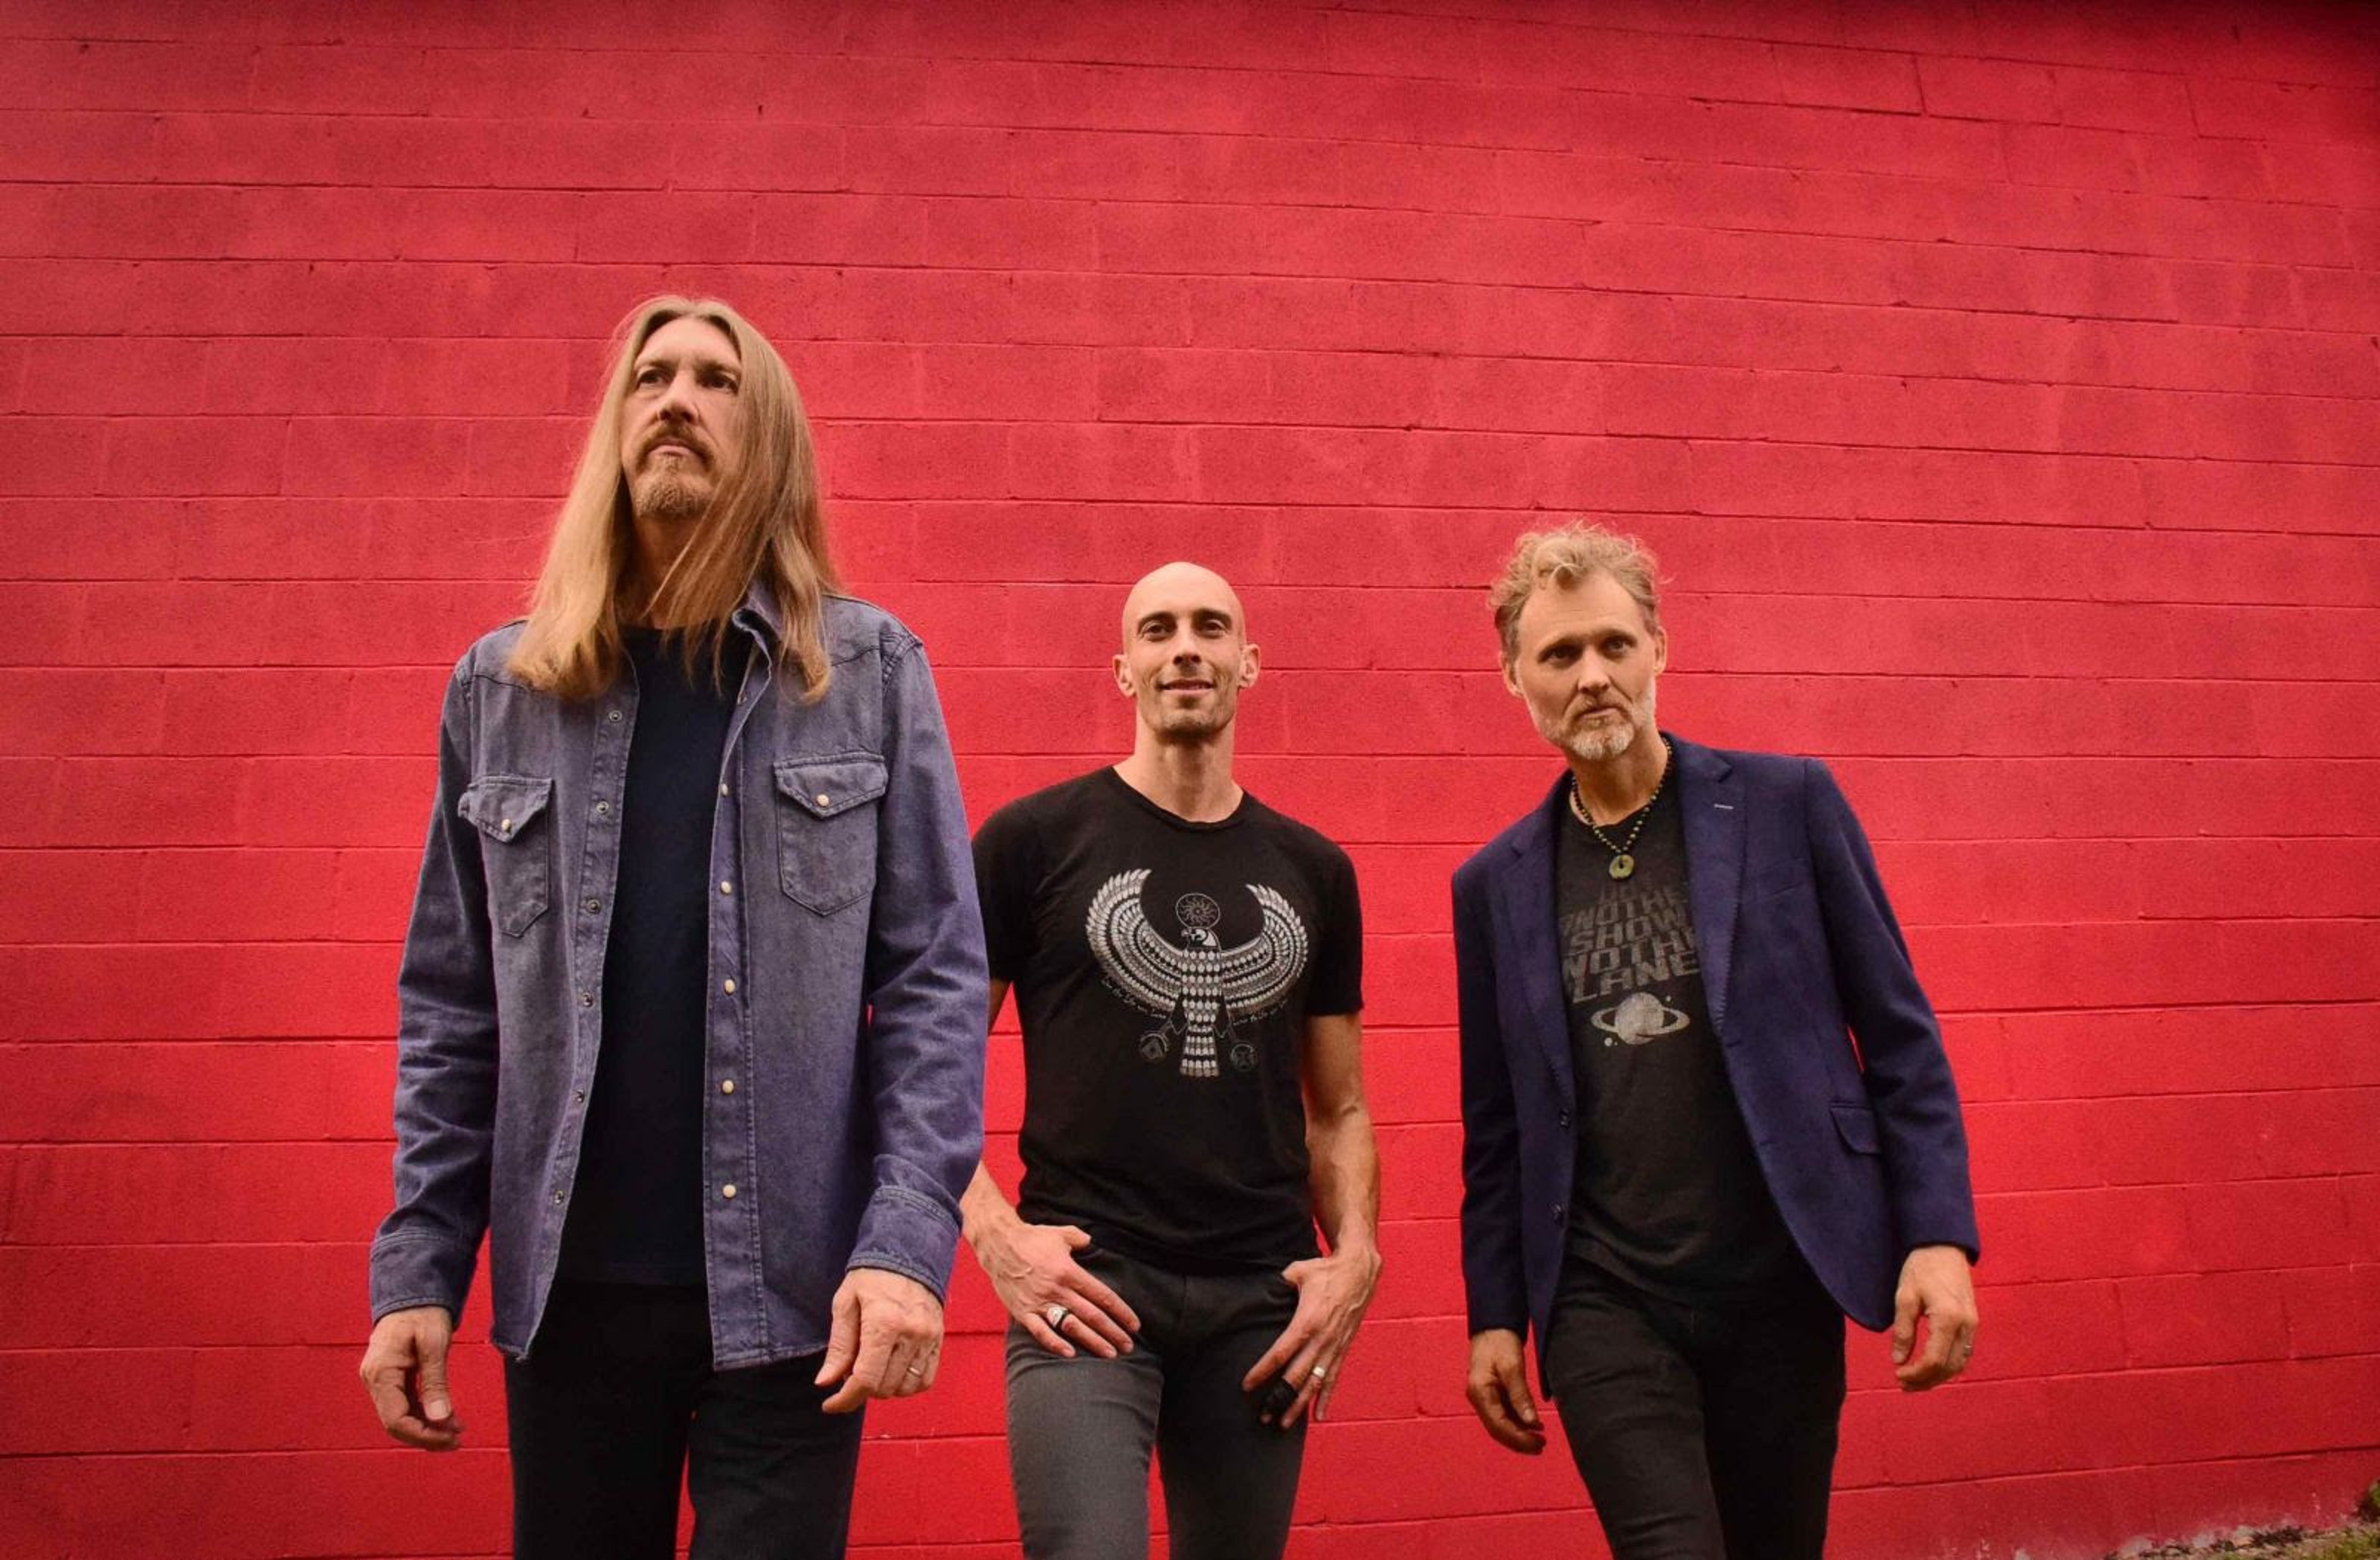 The Wood Brothers Share "Pilgrim" - First Single From New Album 'Heart Is The Hero' Out April 14